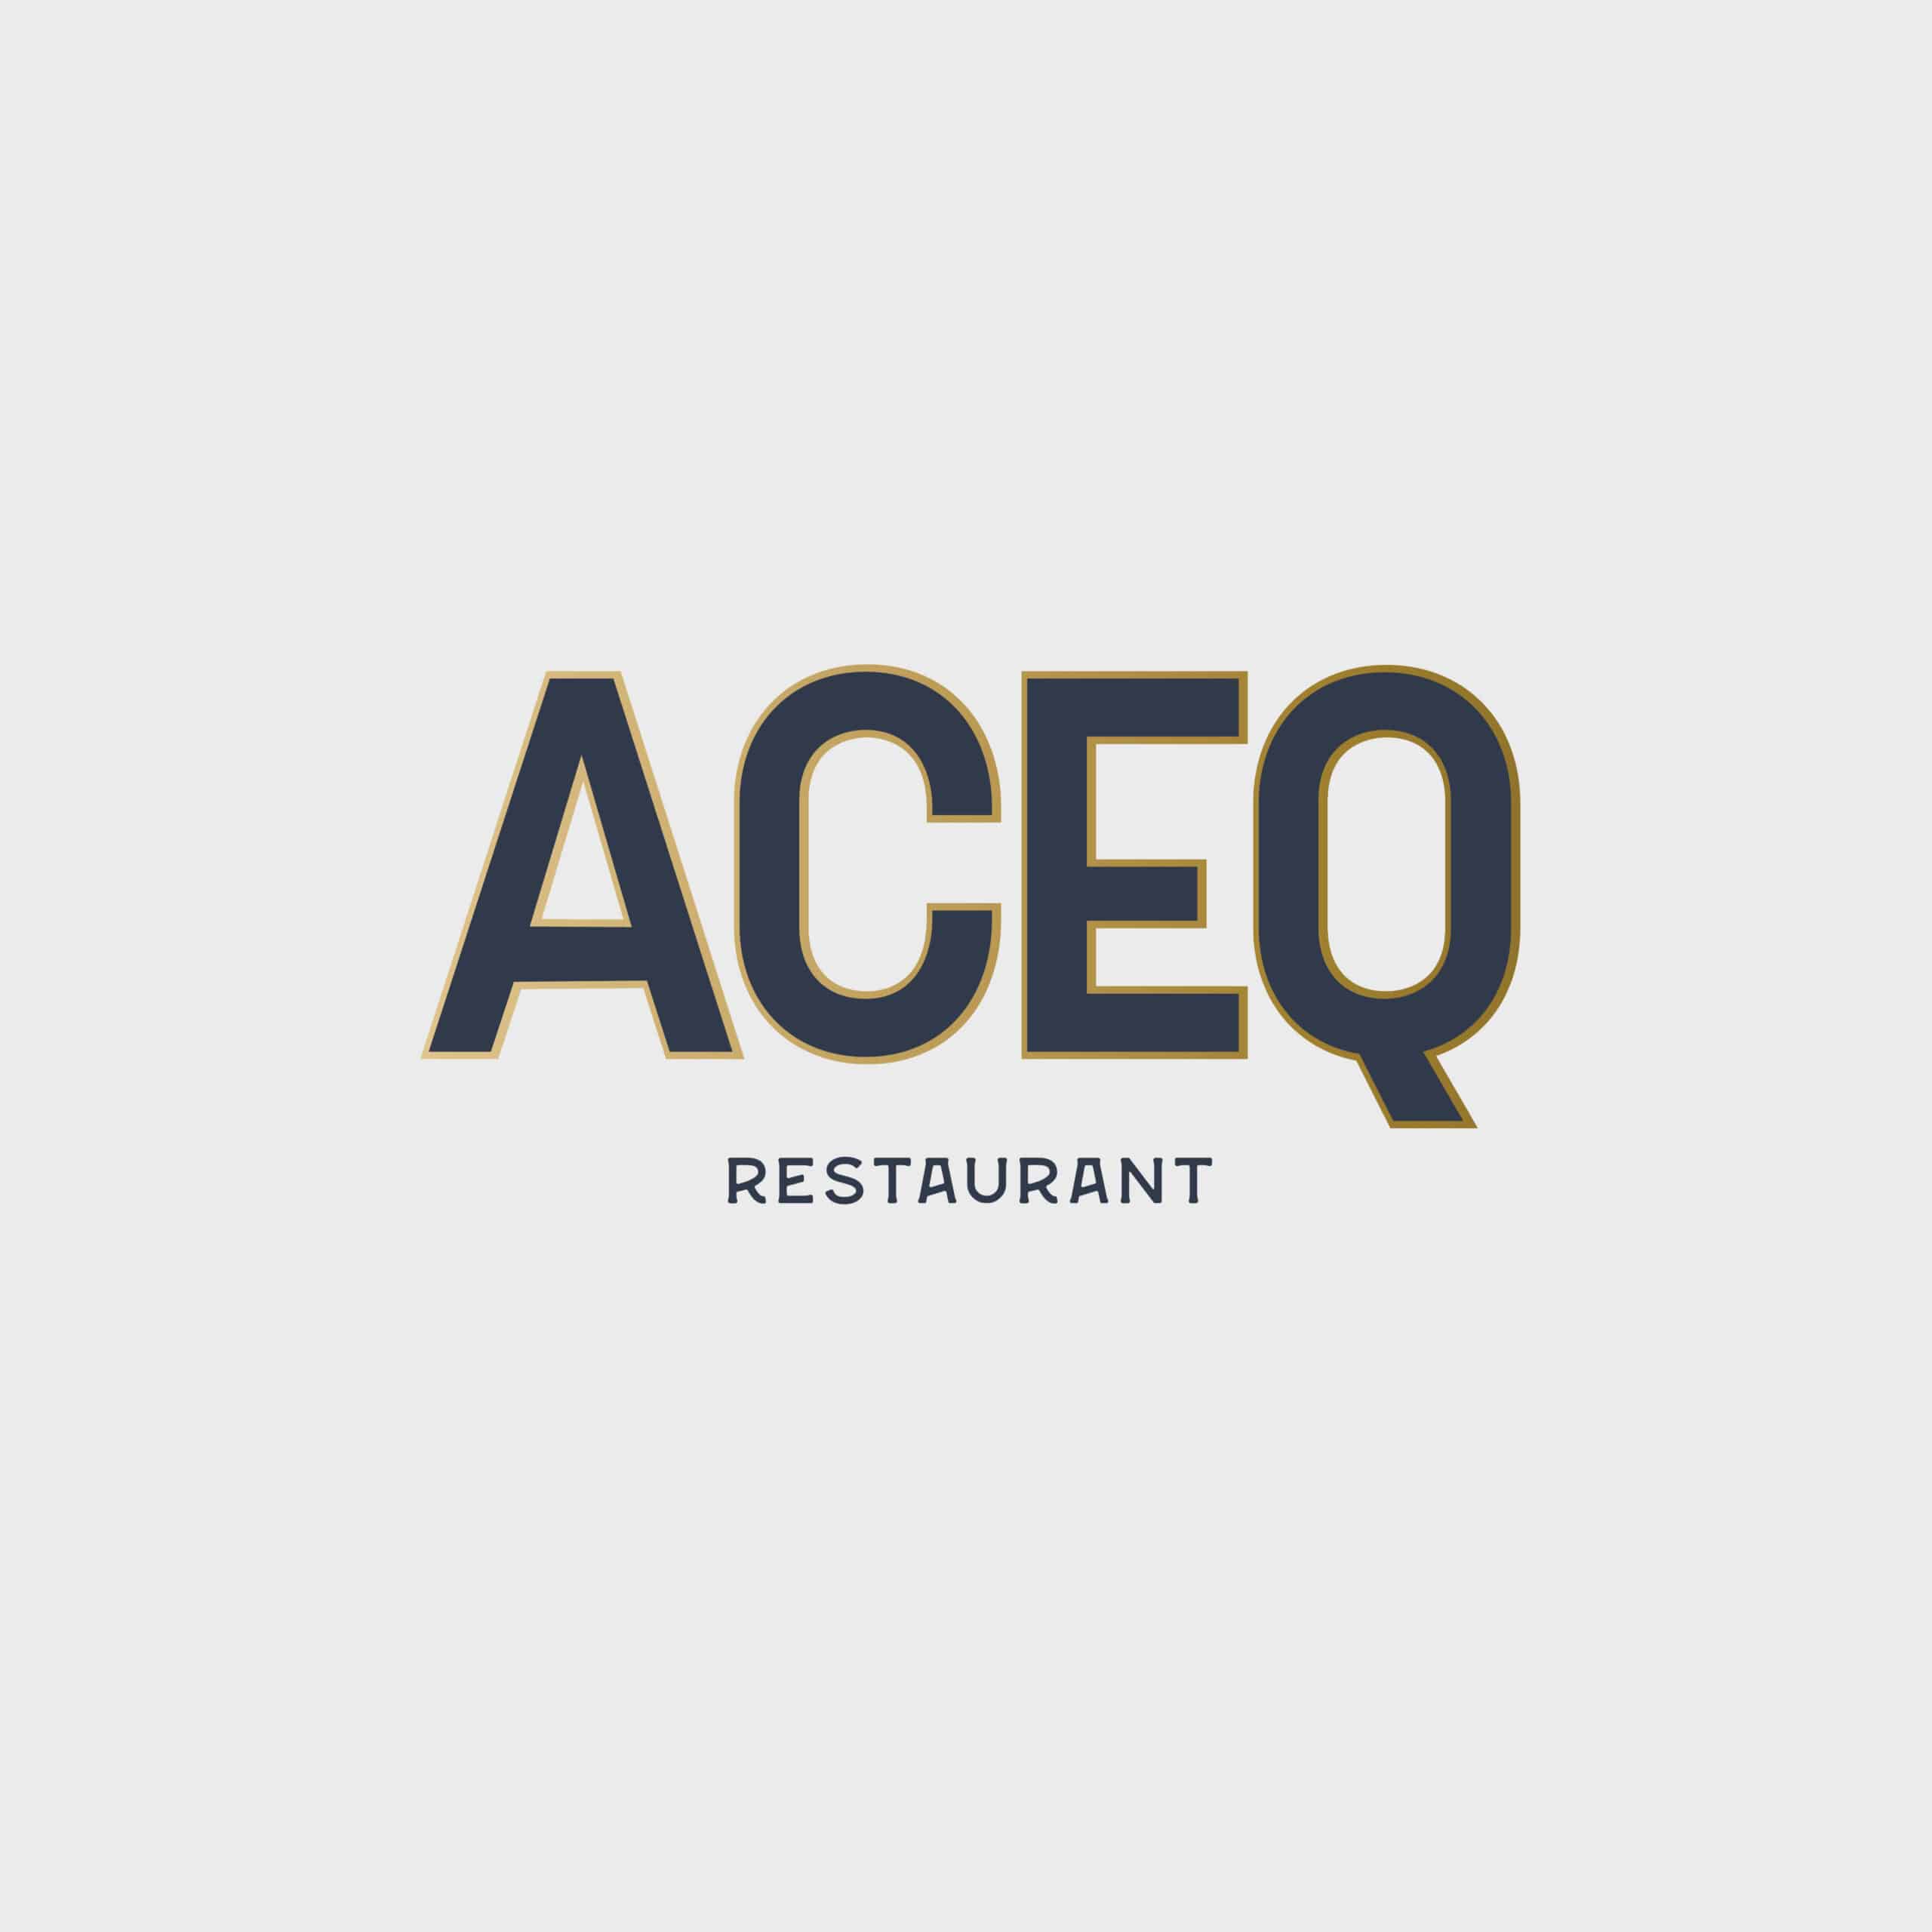 ACEQ Restaurant in Taos New Mexico Logo Design By Stellen Design Branding and Logo Design Agency in Los Angeles CA Logo Of An Owl